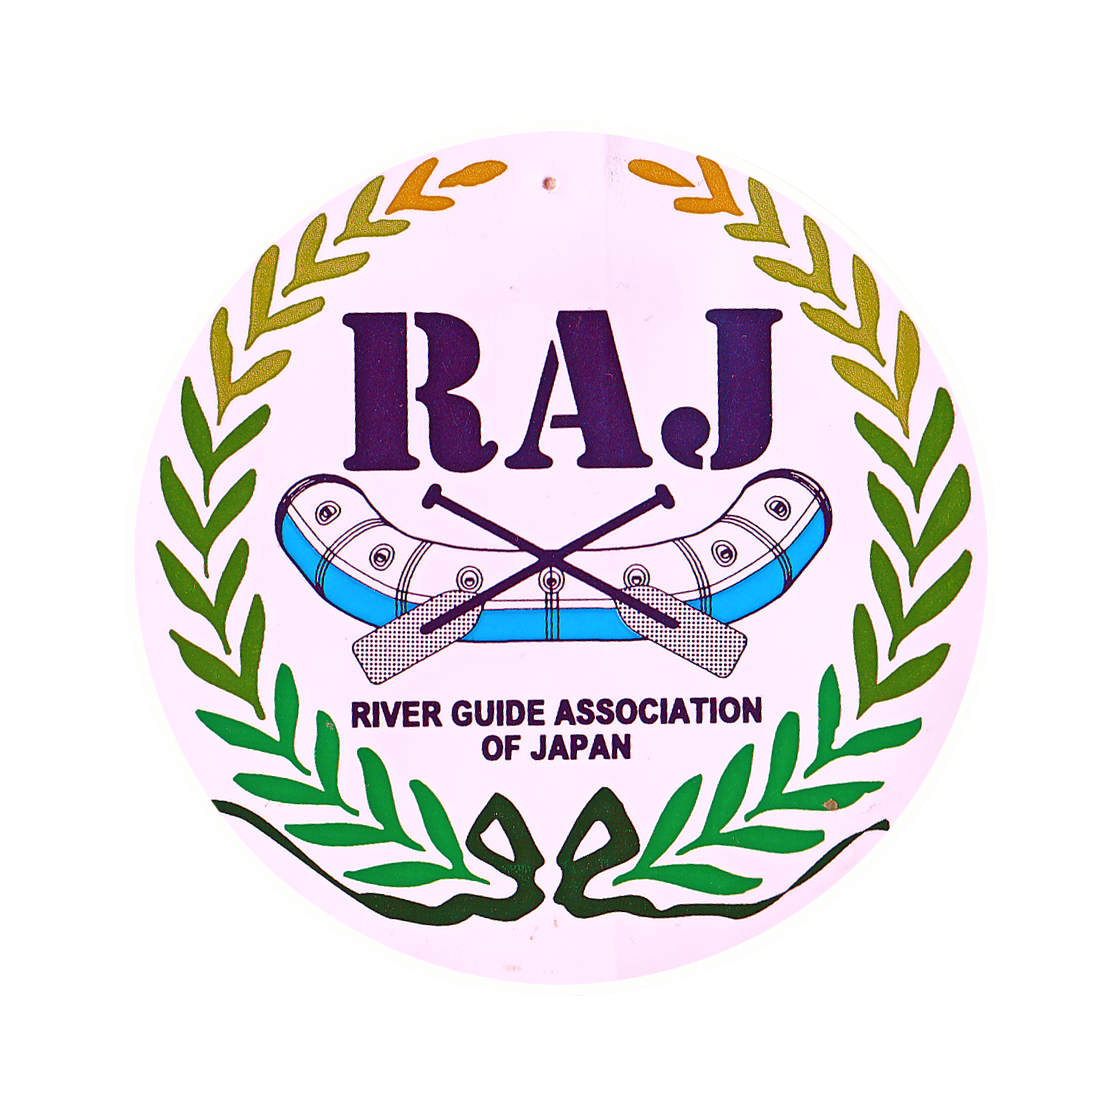 NOASC is a long standing member of the Rafting Association of Japan